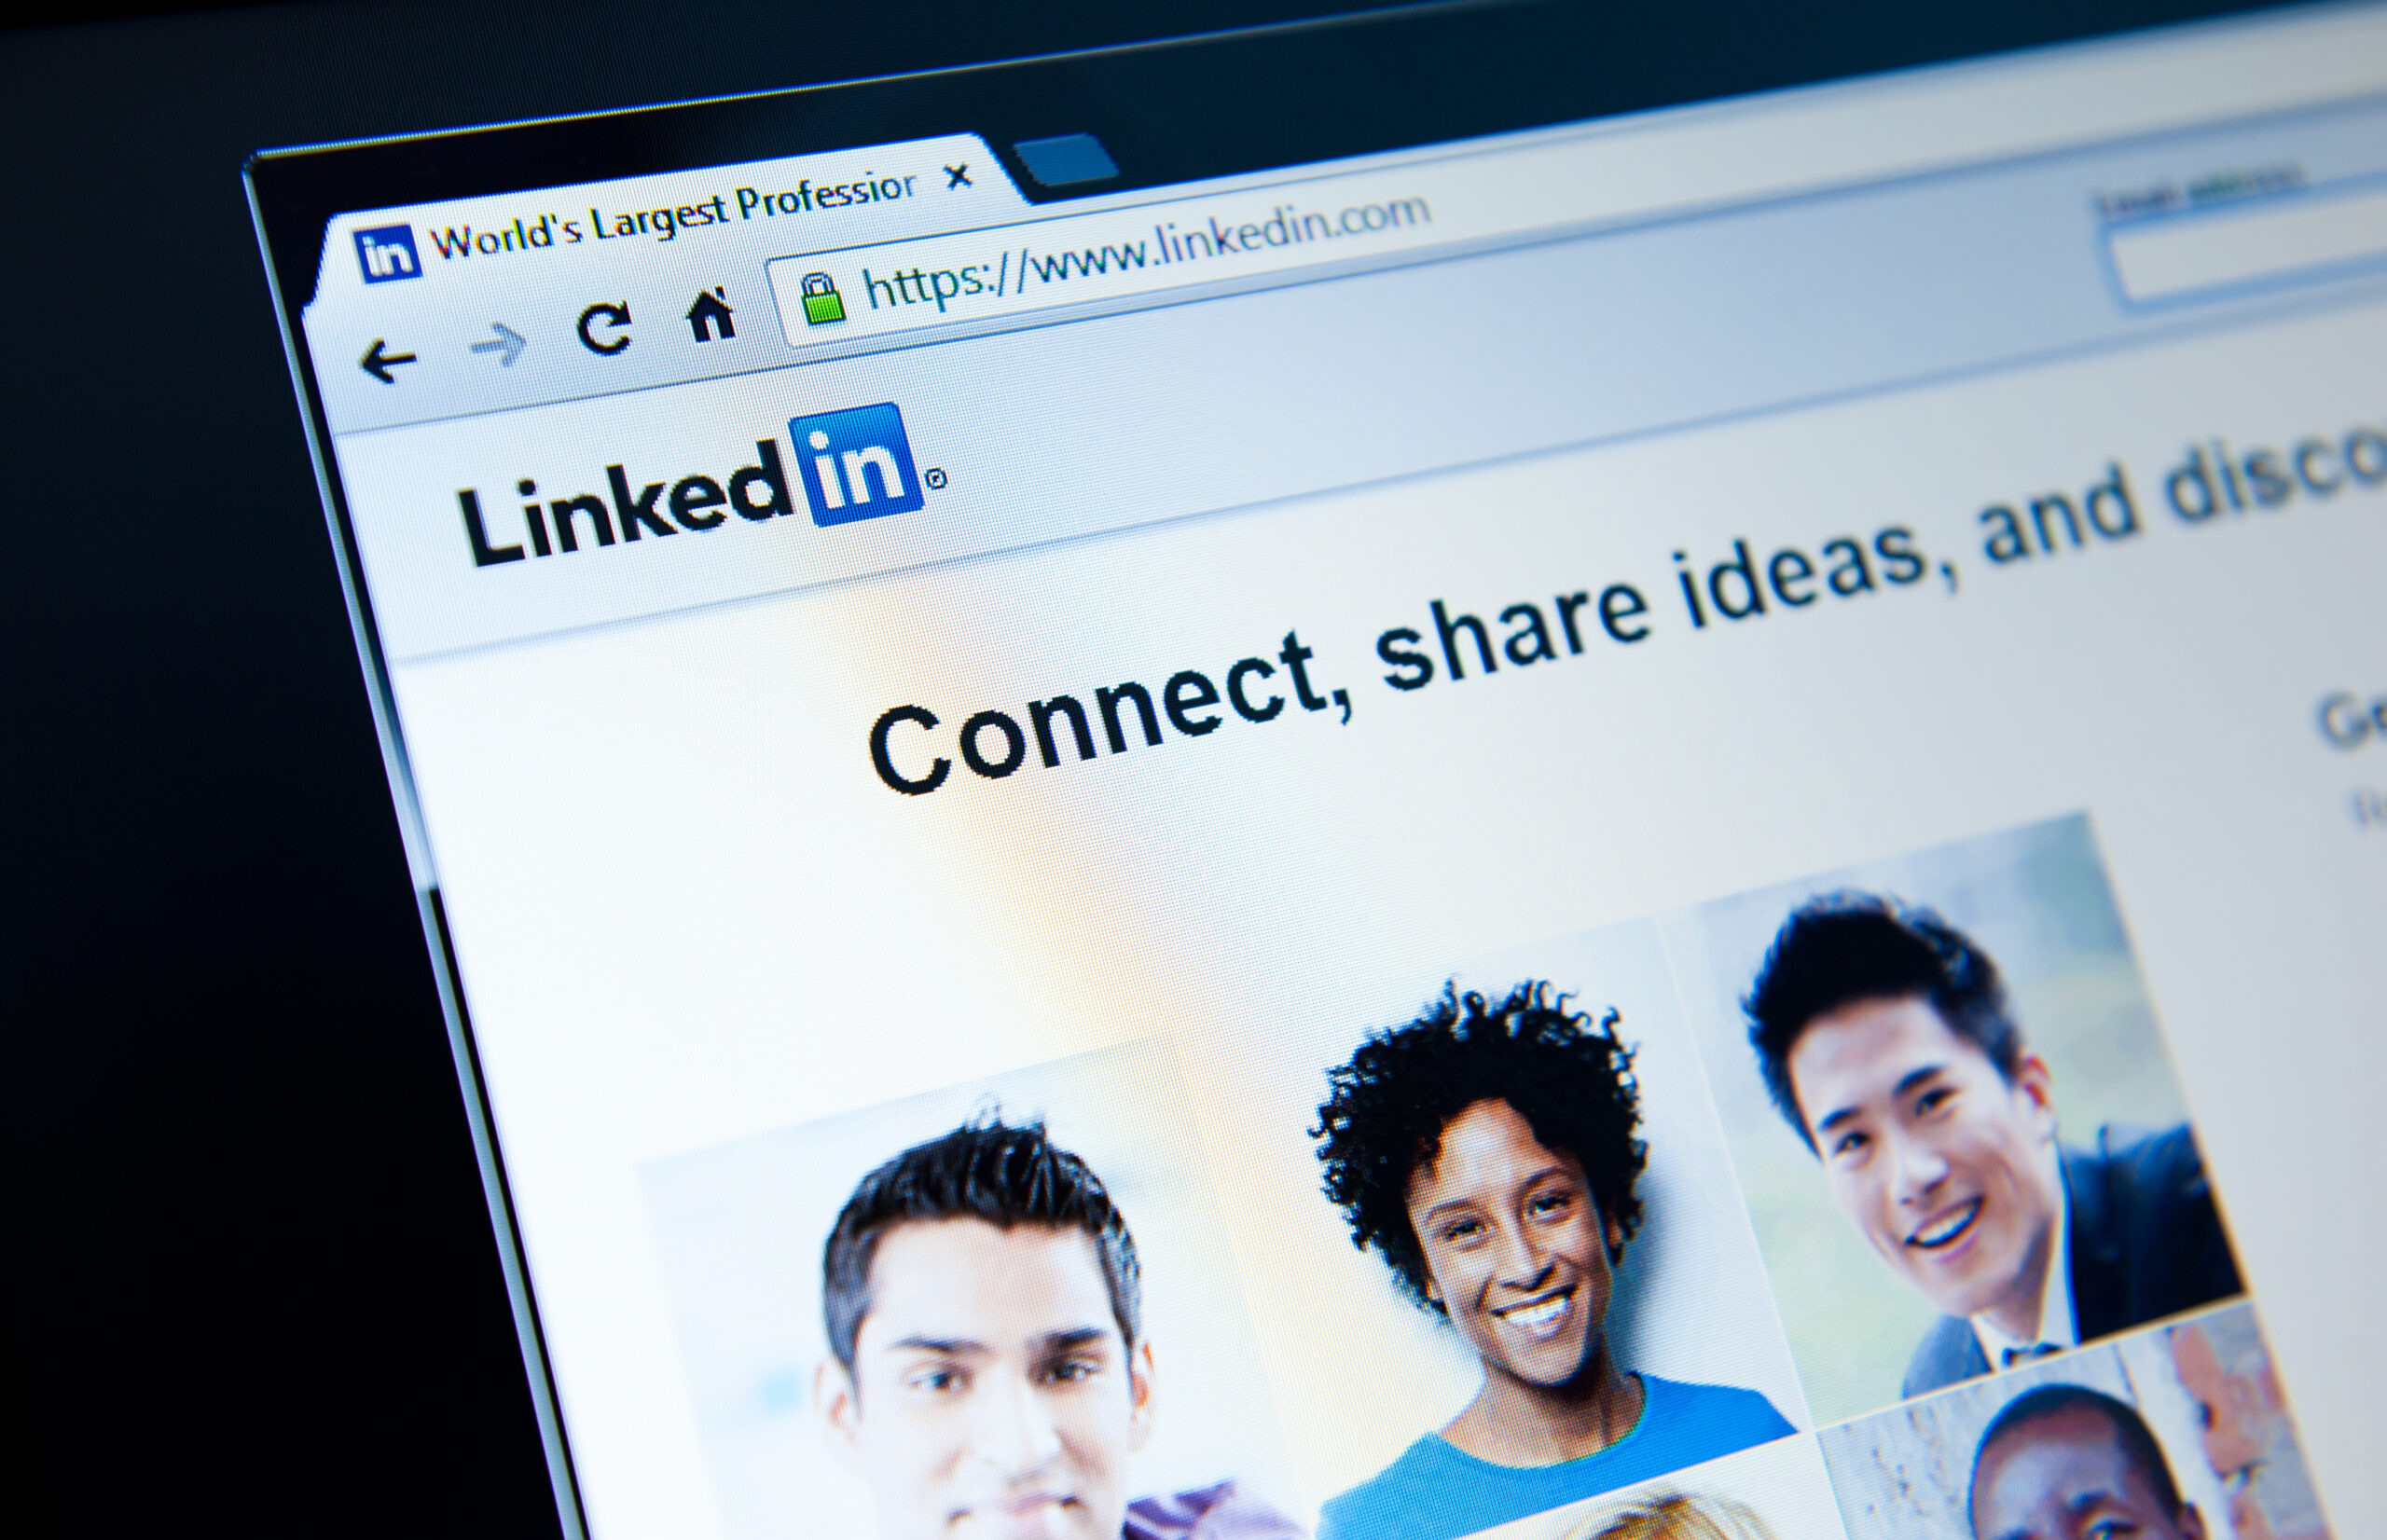 Tips to Make your LinkedIn Profile Stand Out